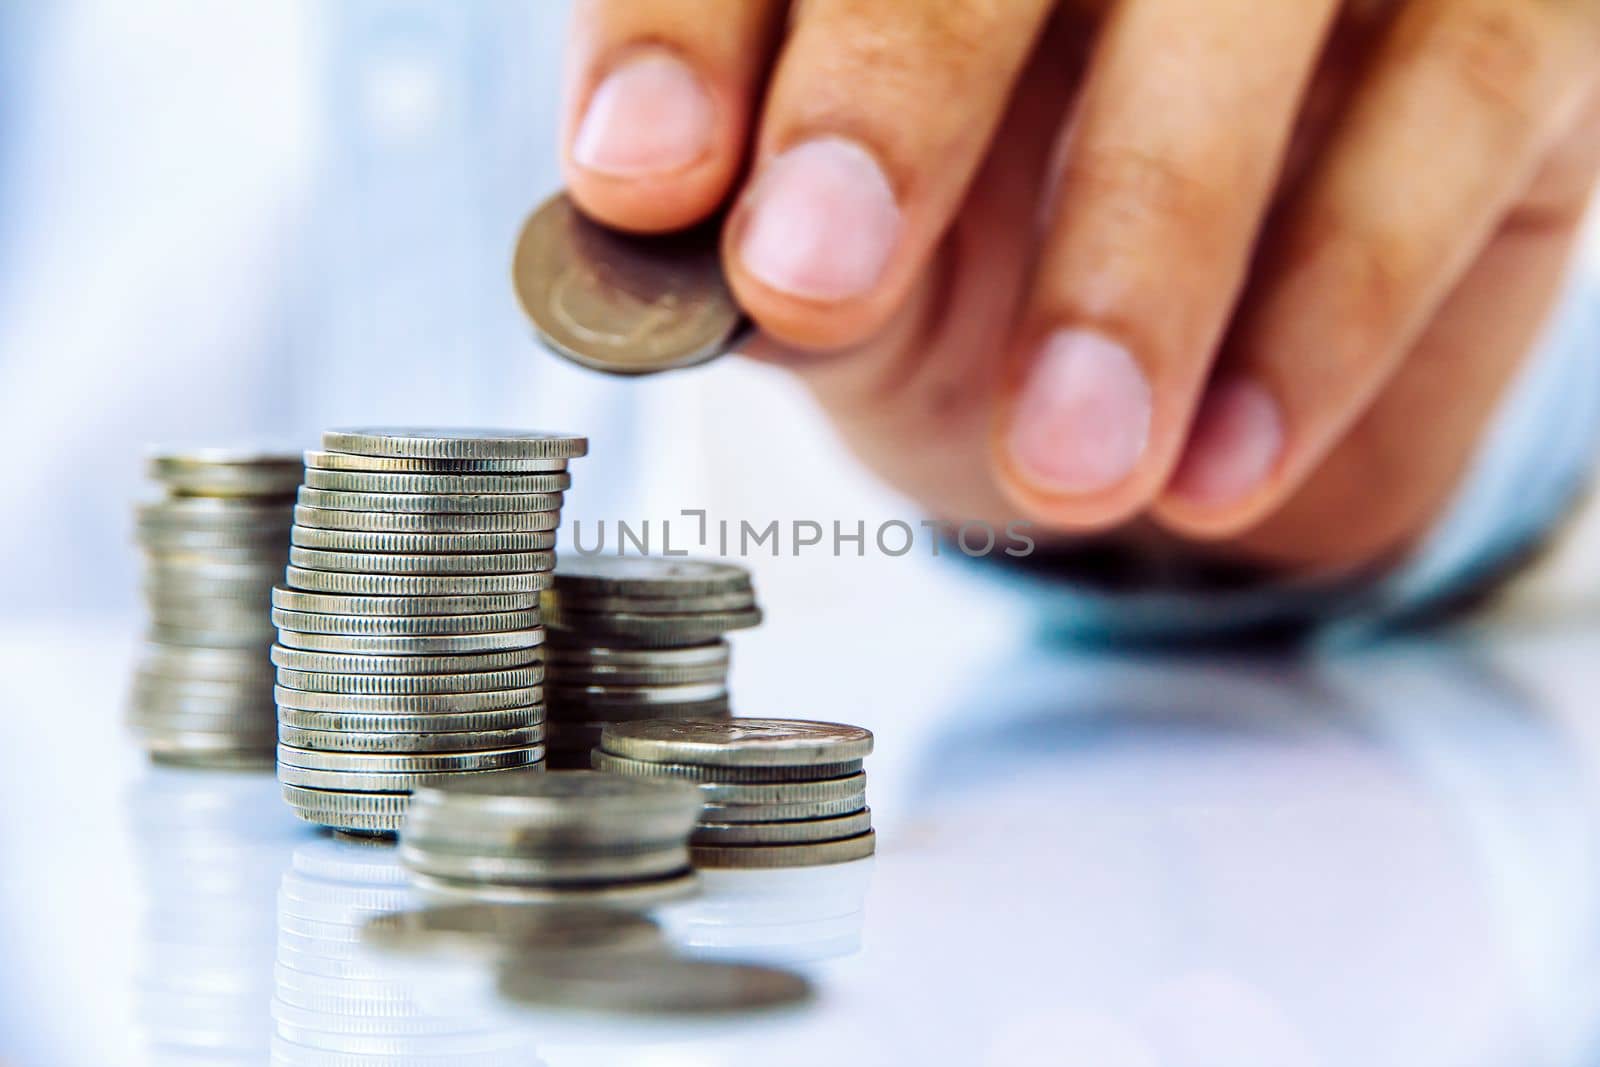 Hand put coin to stack, investment concept